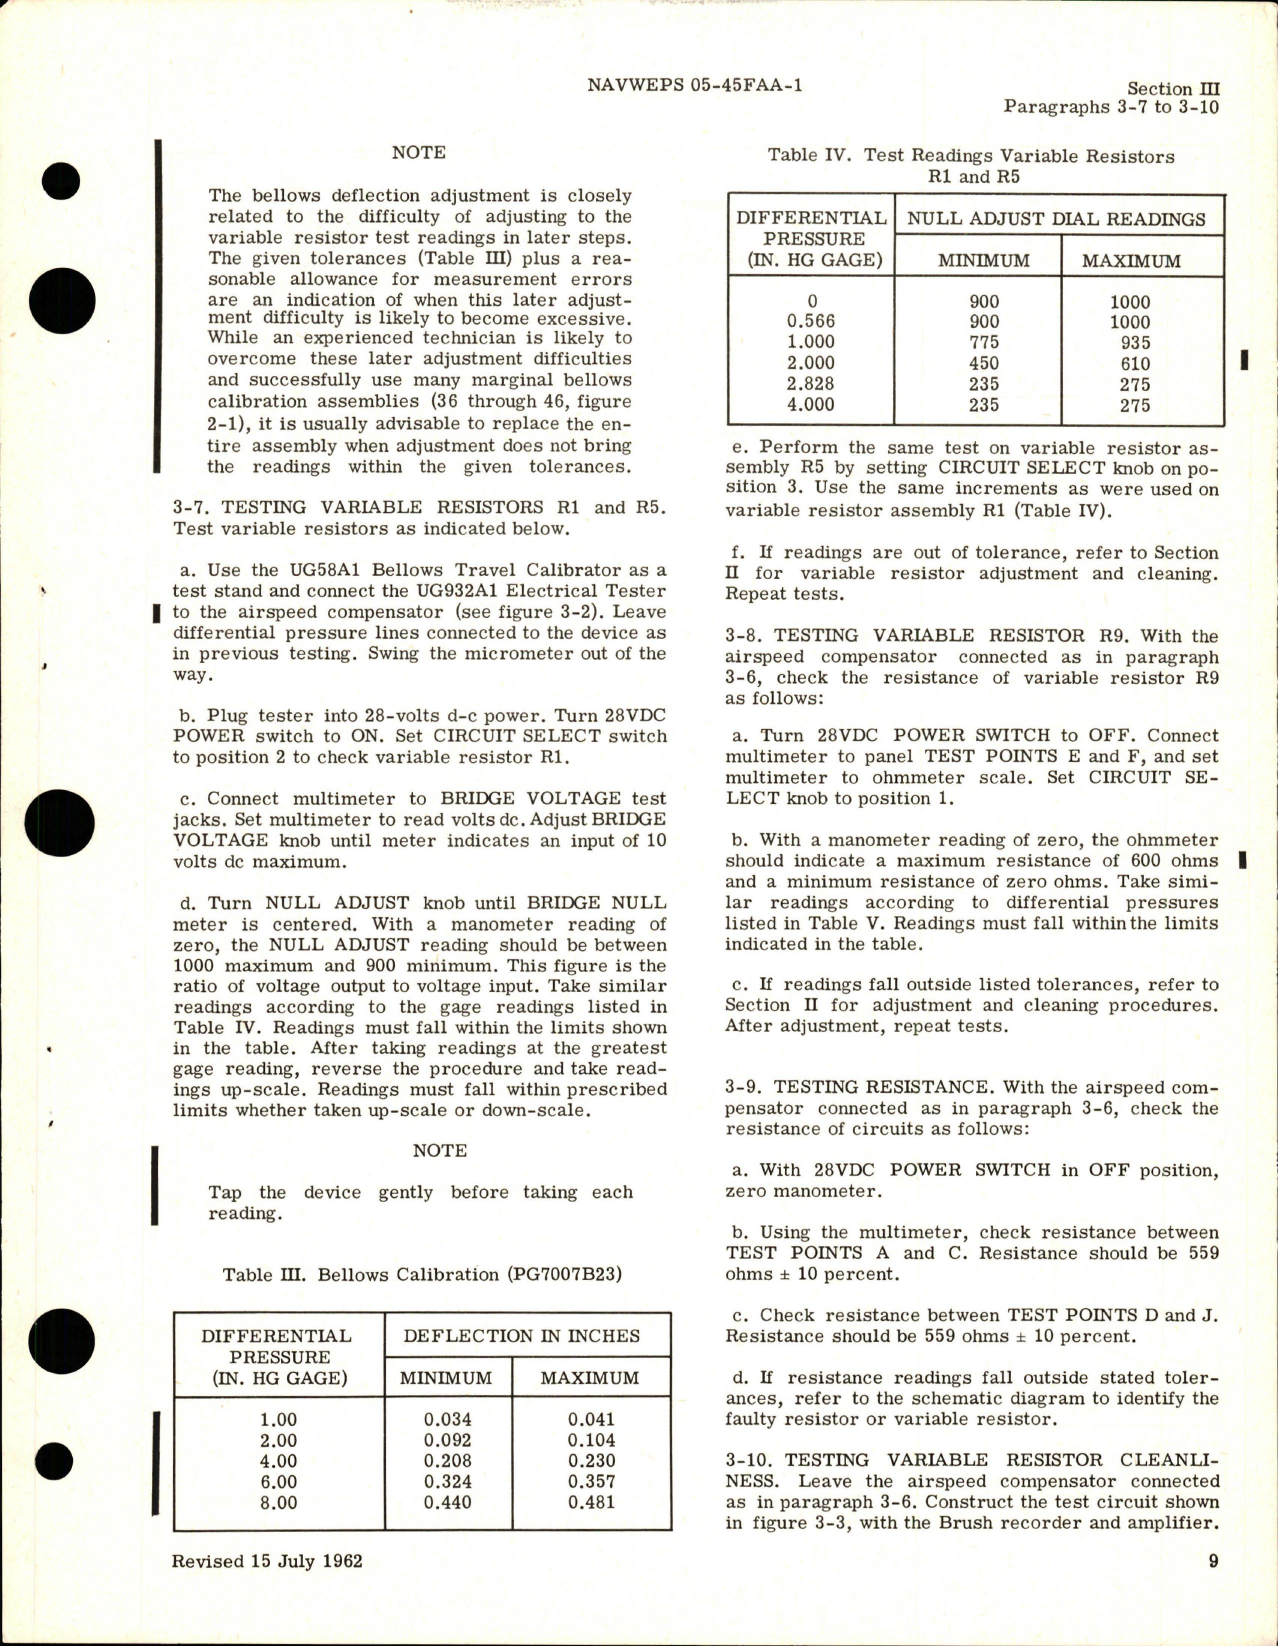 Sample page 5 from AirCorps Library document: Overhaul Instructions for Airspeed Compensator - Parts PG7007B20, PG7007B23, and PG7007B24